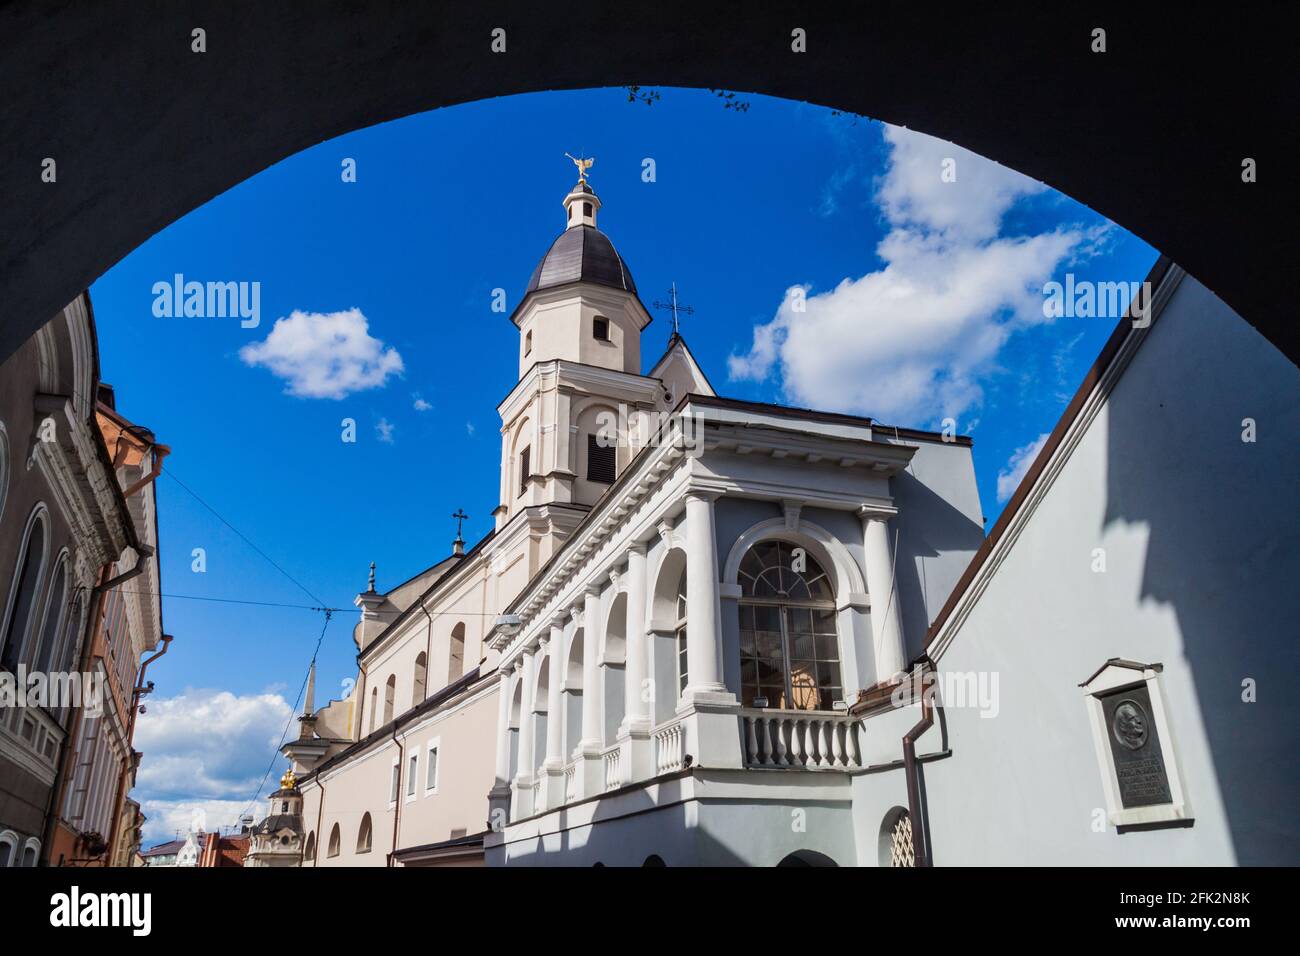 The Church of St Theresa in Vilnius as seen from the Gate of Dawn, Lithuania. Stock Photo